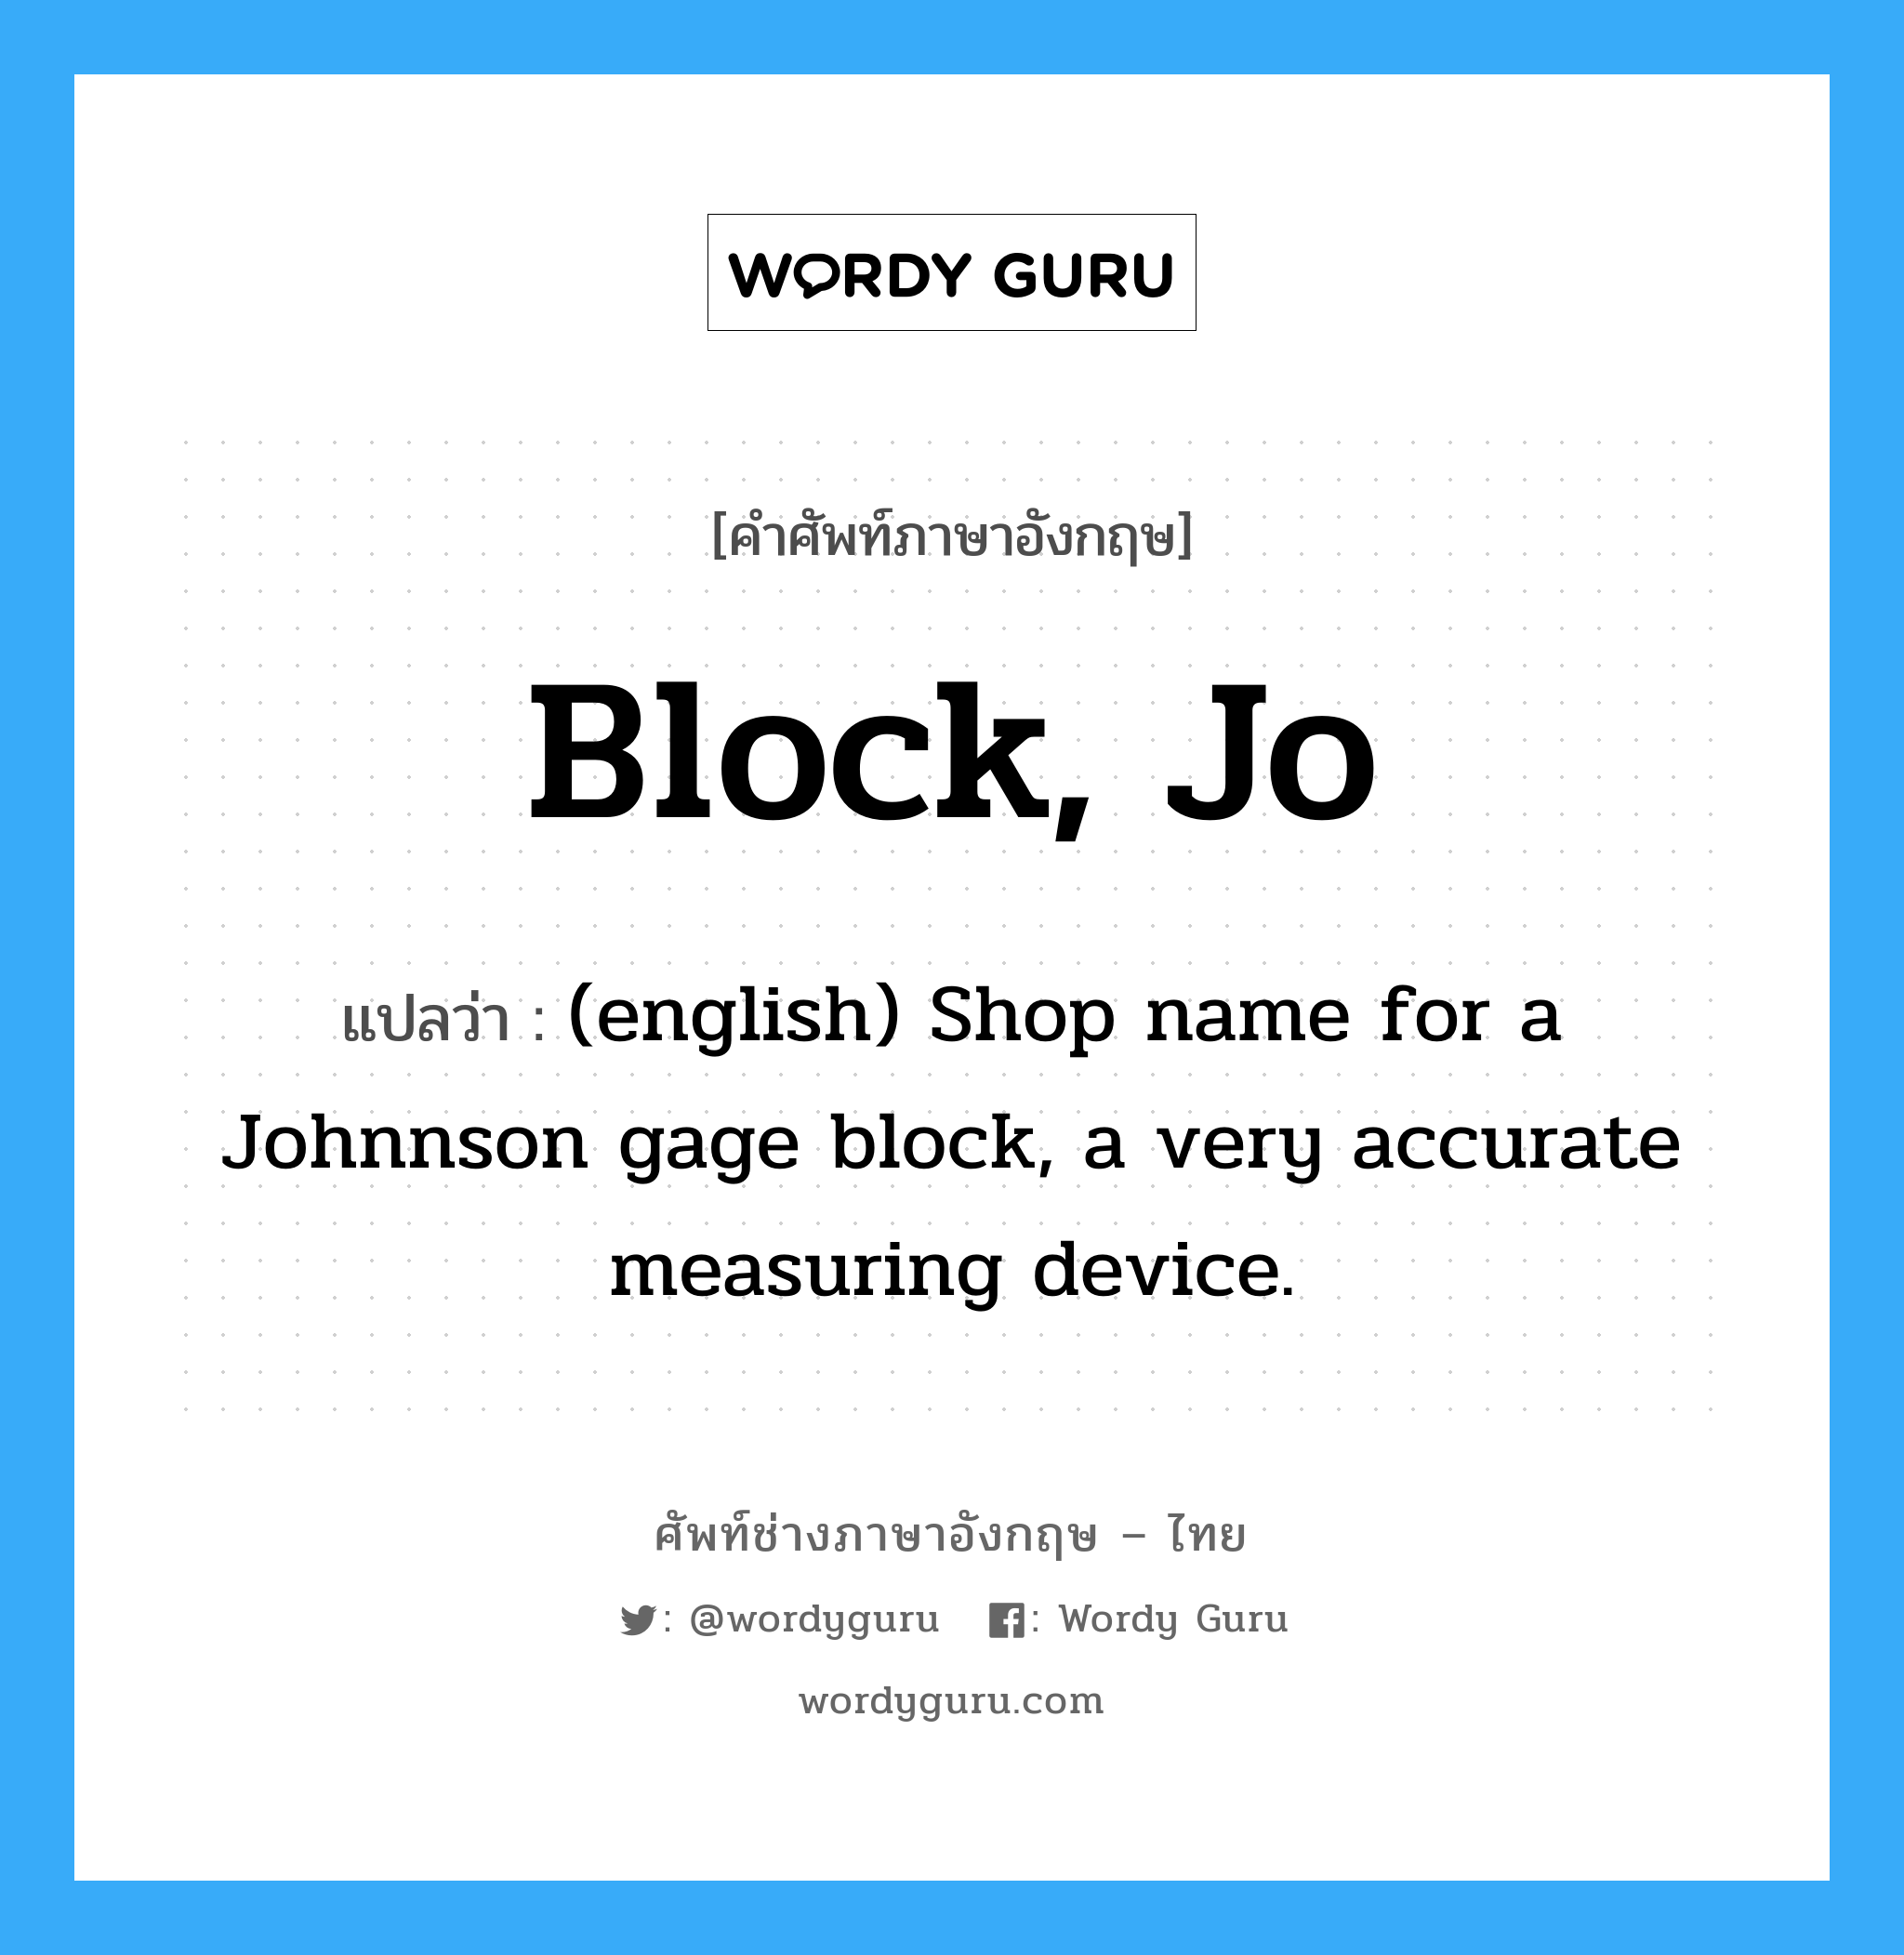 (english) Shop name for a Johnnson gage block, a very accurate measuring device. ภาษาอังกฤษ?, คำศัพท์ช่างภาษาอังกฤษ - ไทย (english) Shop name for a Johnnson gage block, a very accurate measuring device. คำศัพท์ภาษาอังกฤษ (english) Shop name for a Johnnson gage block, a very accurate measuring device. แปลว่า Block, Jo